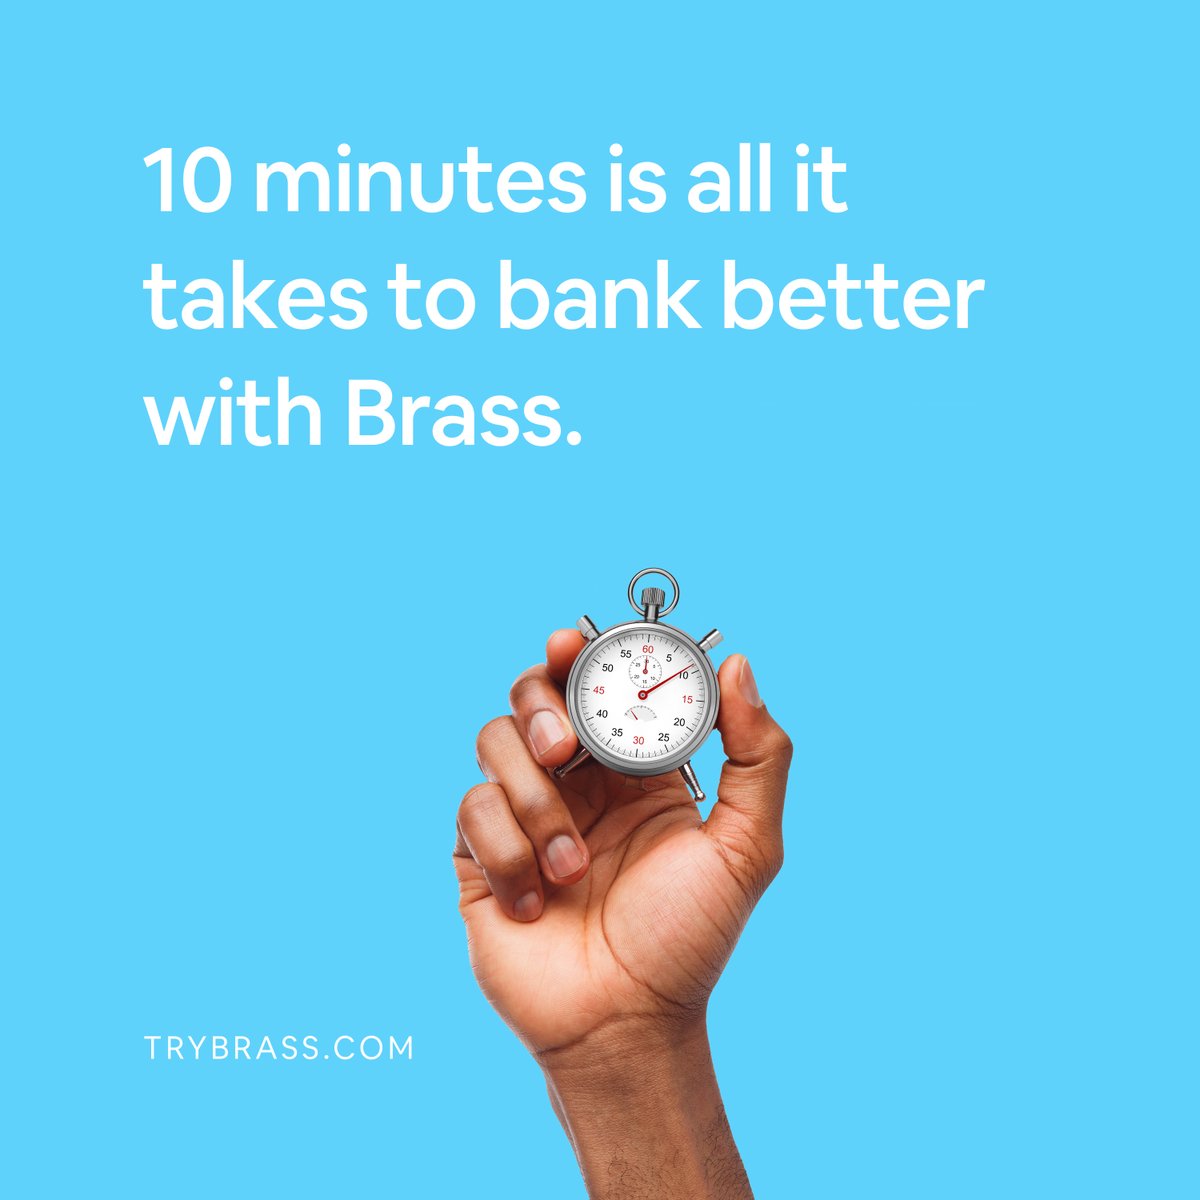 Because we care about your time and convenience. ⁠
⁠
#Fintech #Brass #BigStartsSmall #BetterForBusiness #BusinessBanking  ⁠